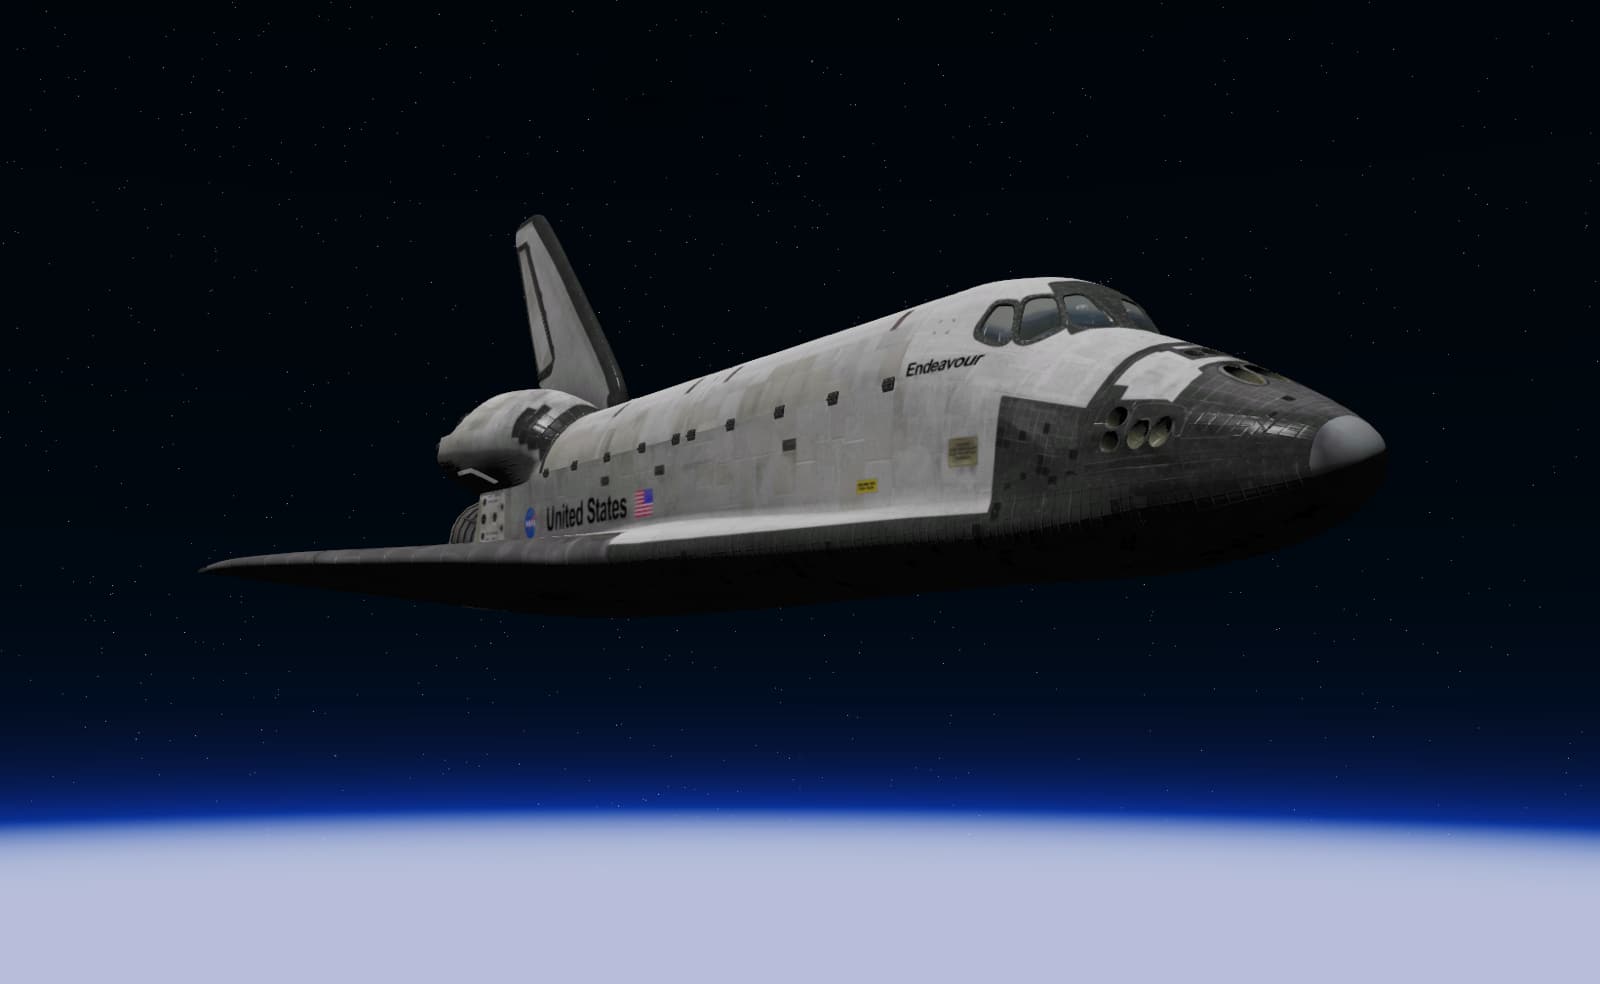 free space flight simulator games for pc